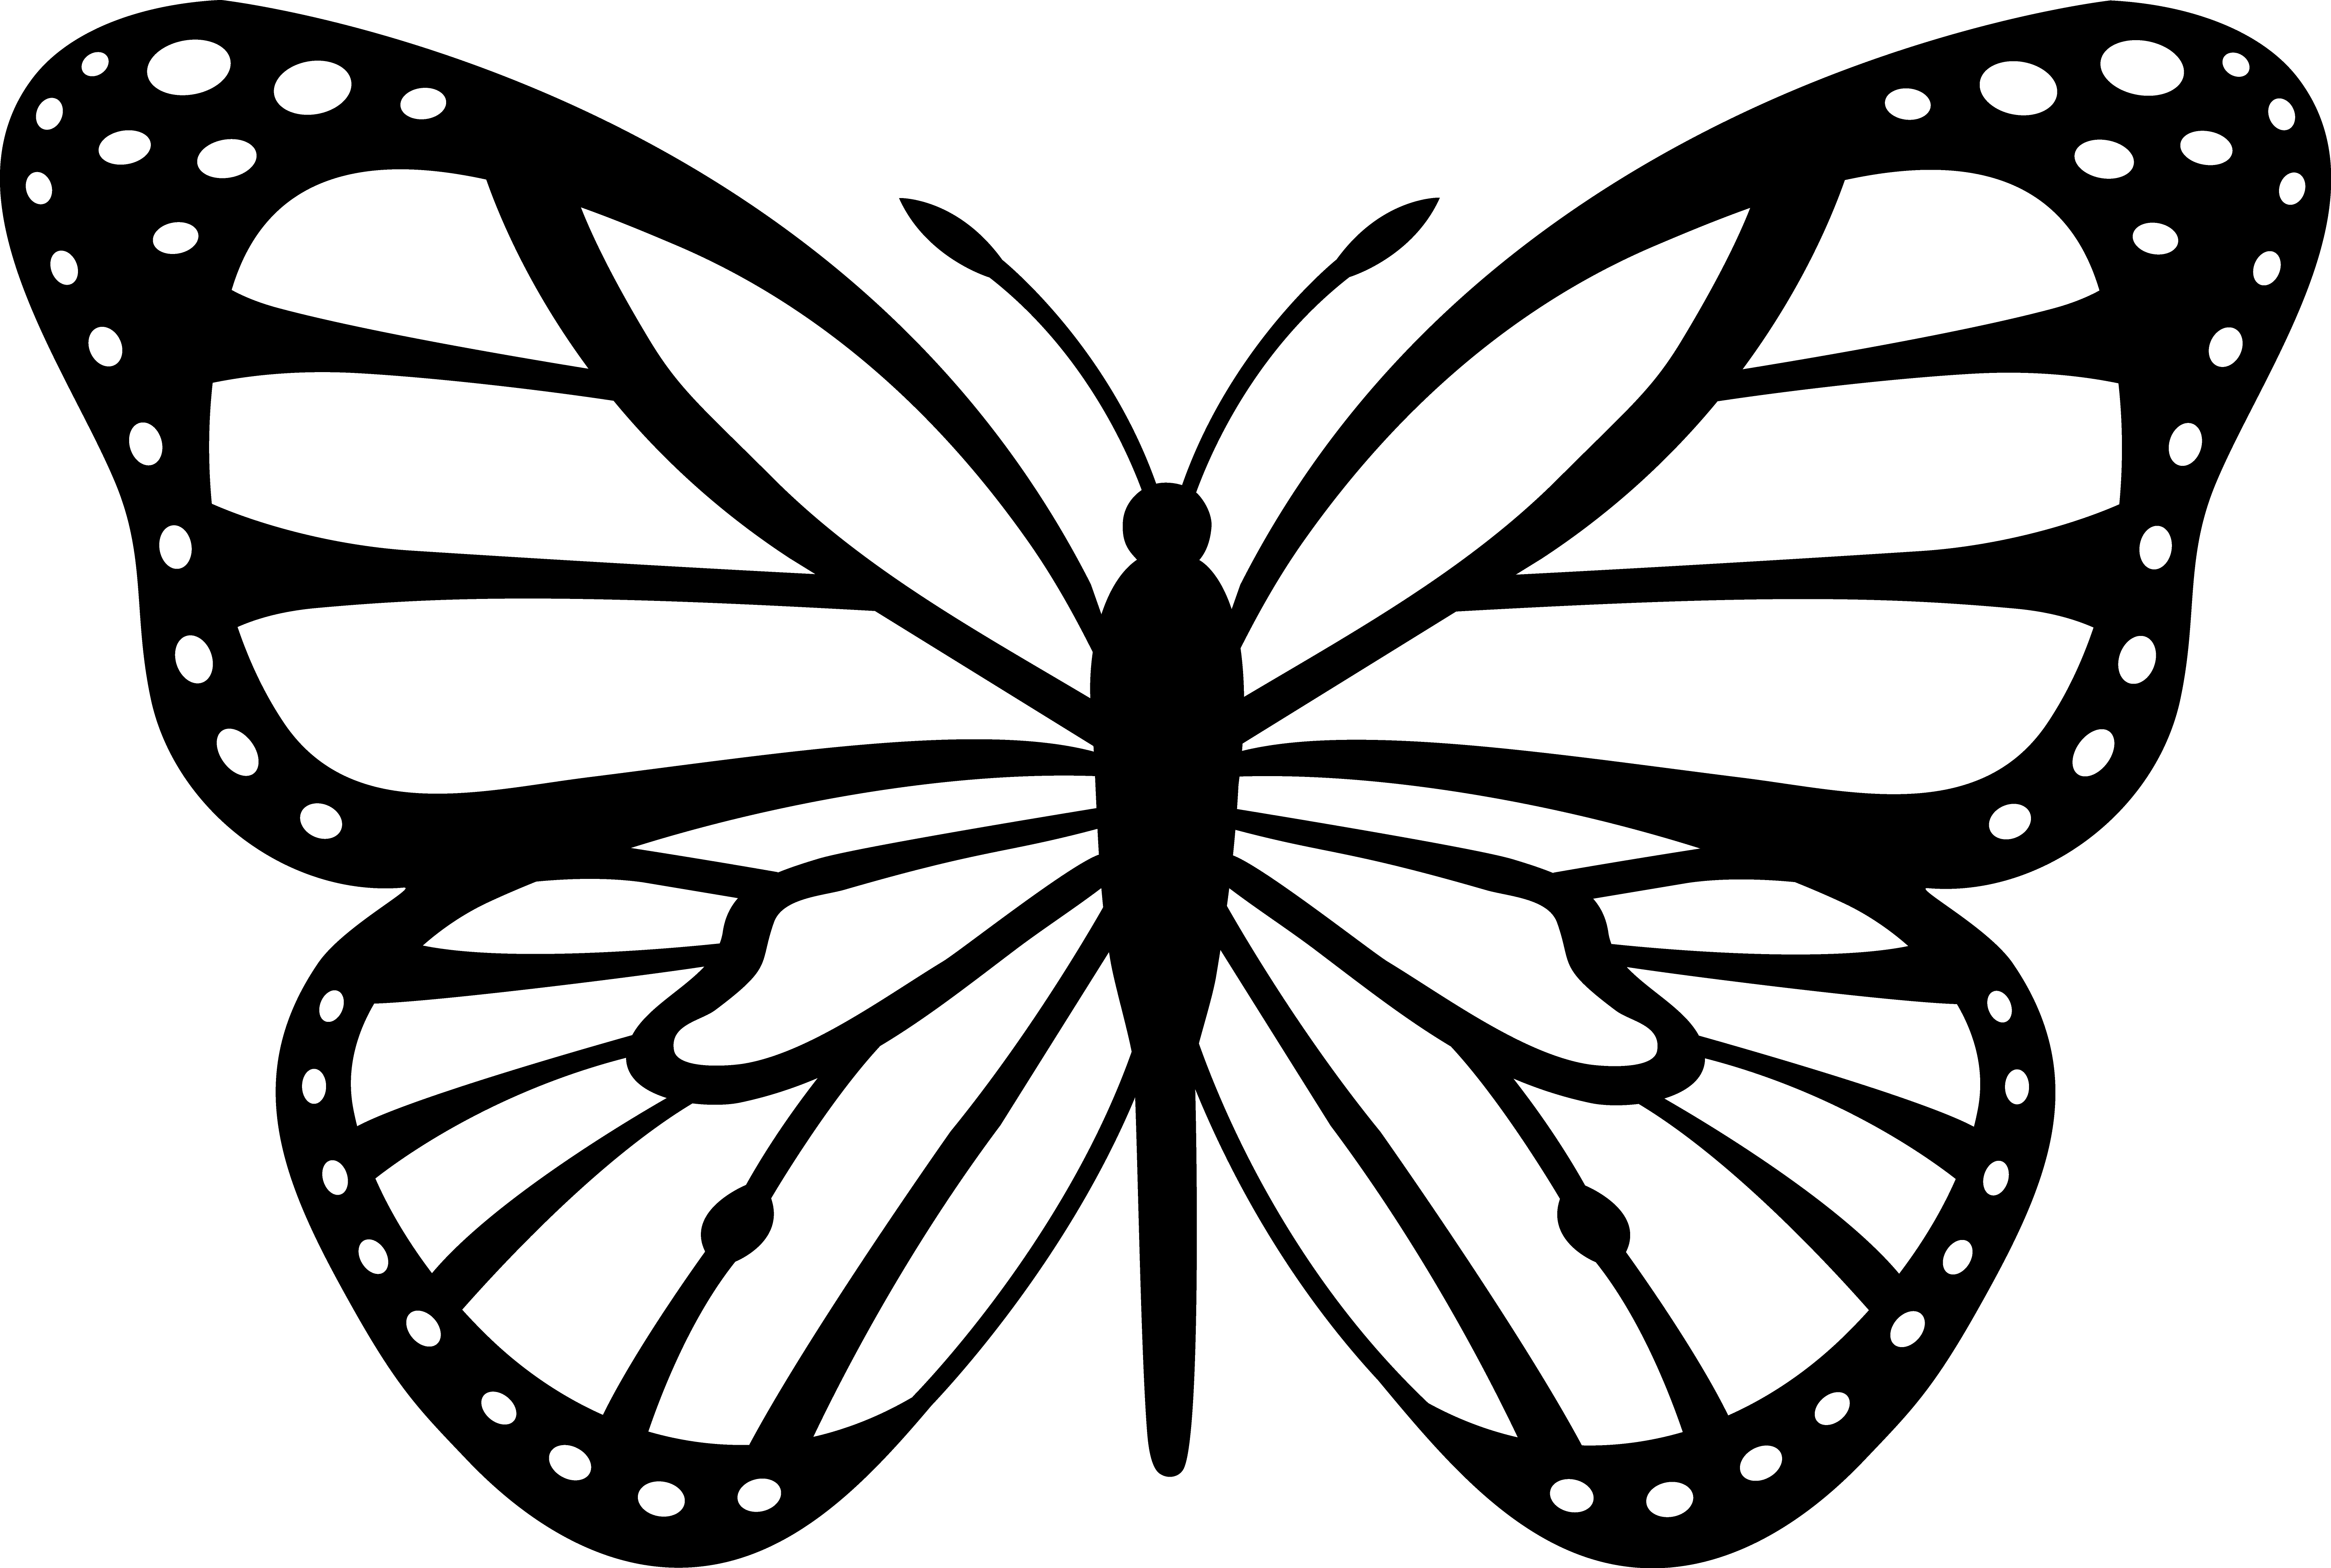 Monarch Butterfly Black White | Free Images at Clker.com - vector clip